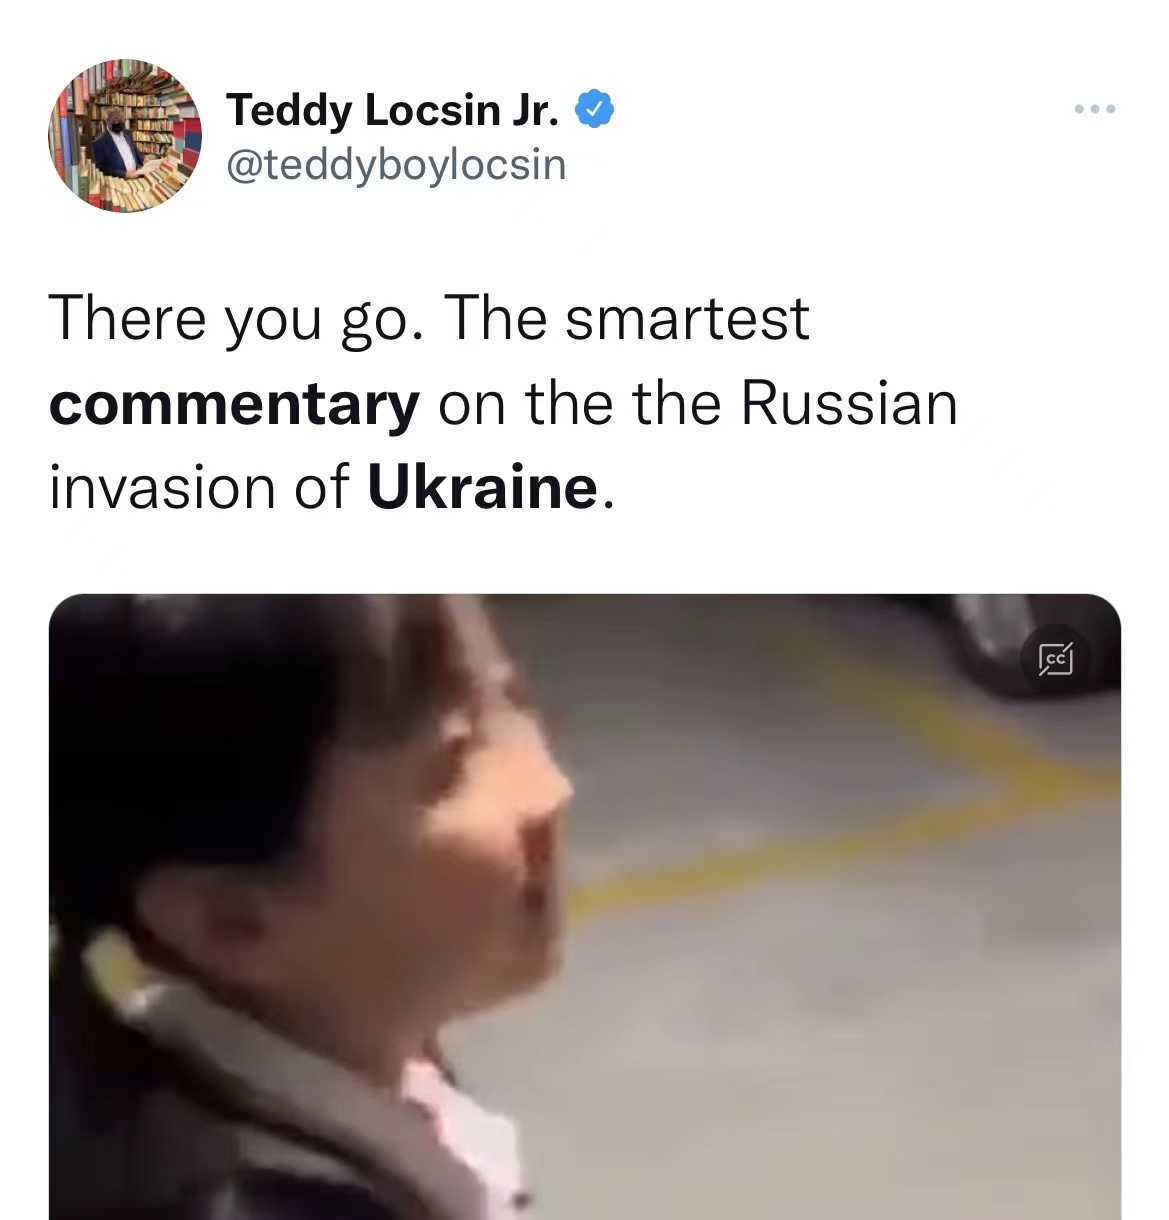 The Philippine Foreign Affairs Secretary, Teodoro Locsin Jr., praised the girl's commantary of Russia-Ukraine conflict as the 'smartest'. Source: Twitter